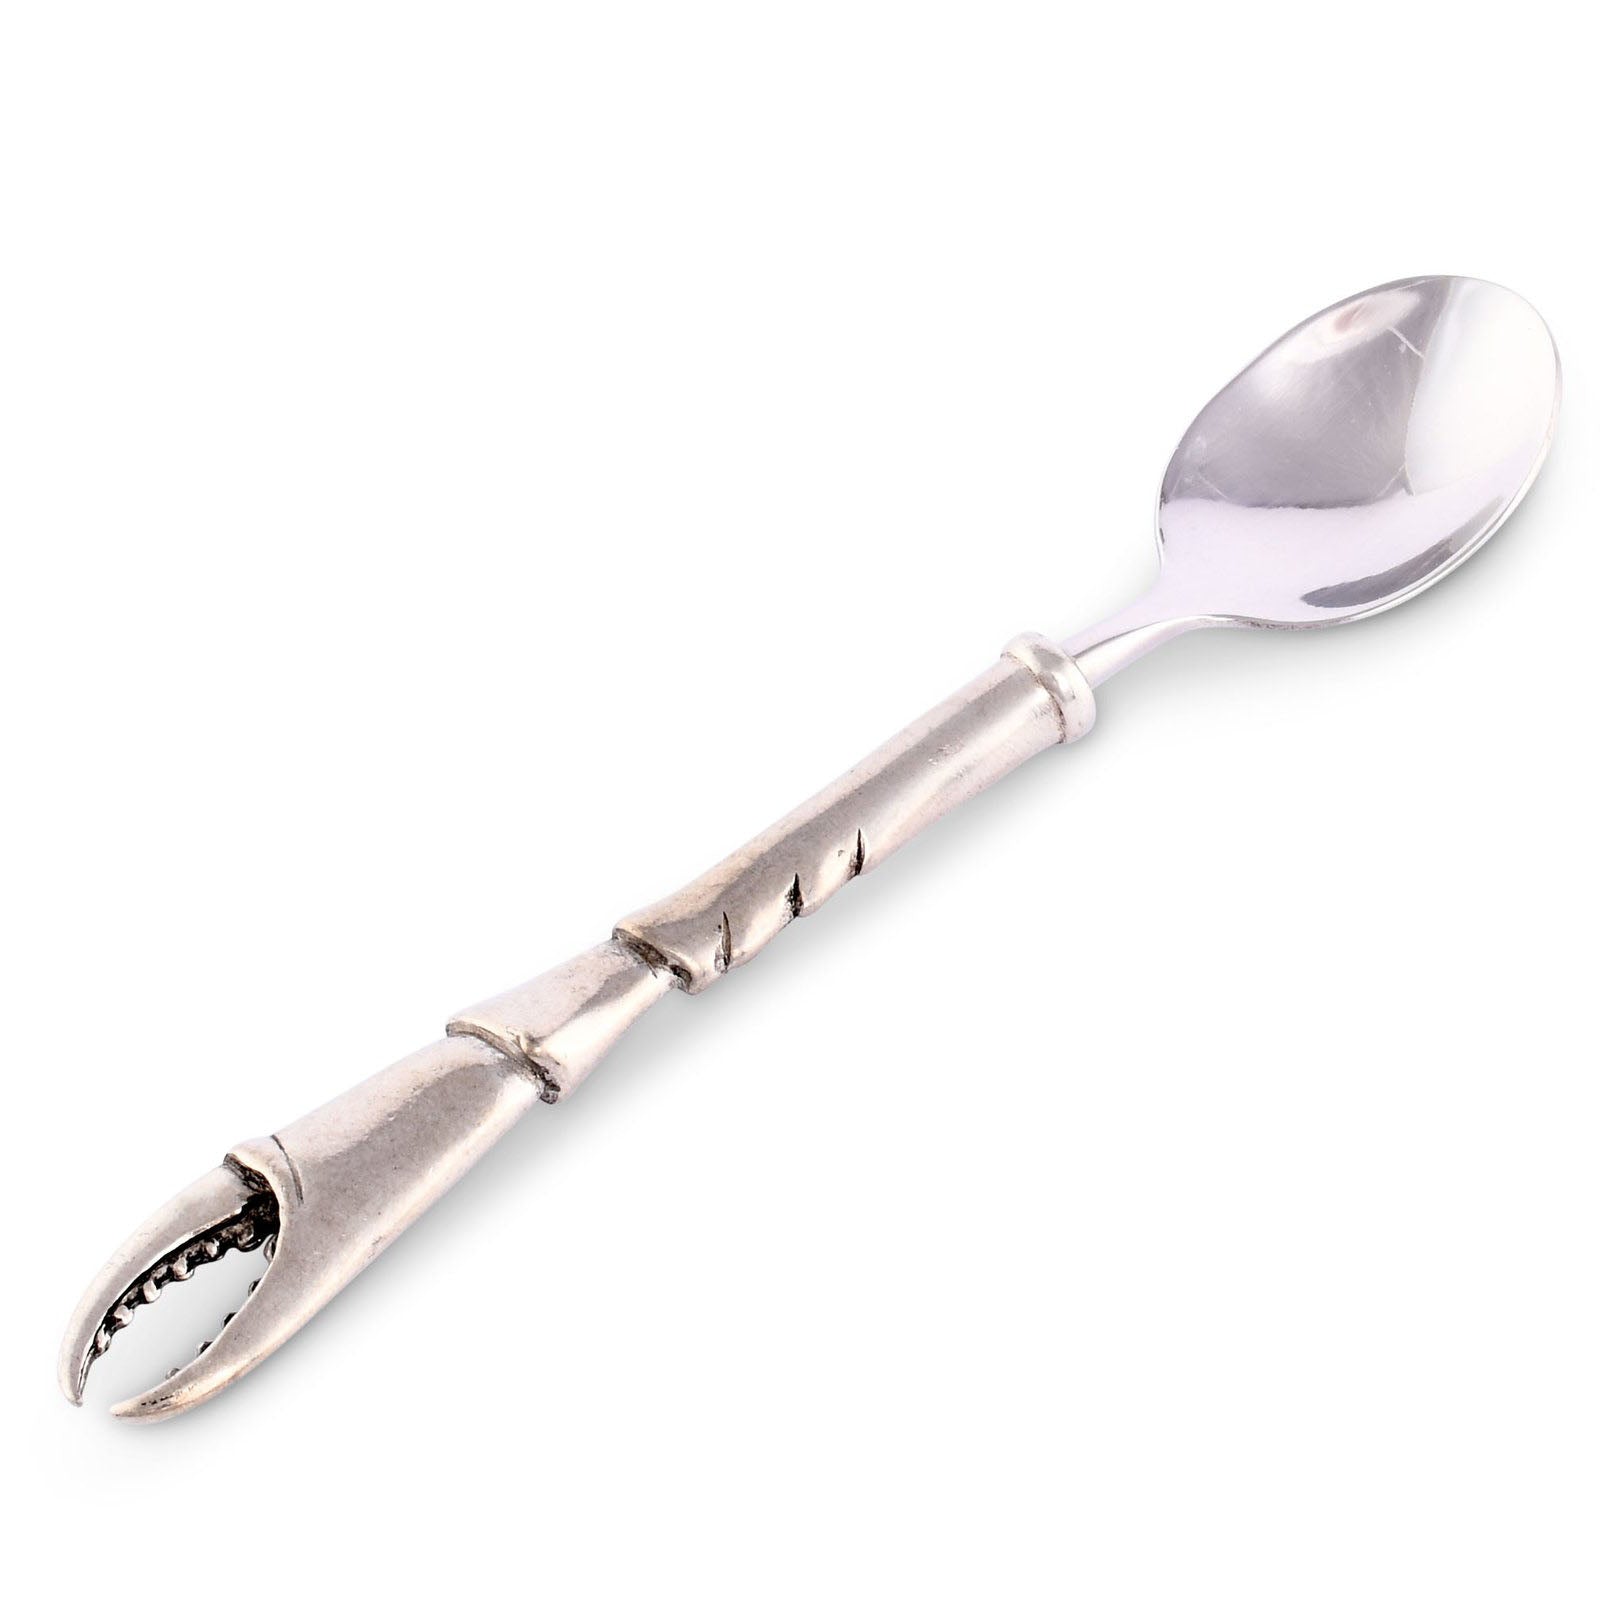 Pewter Handled Crab Claw Spoon- Timothy De Clue Collection